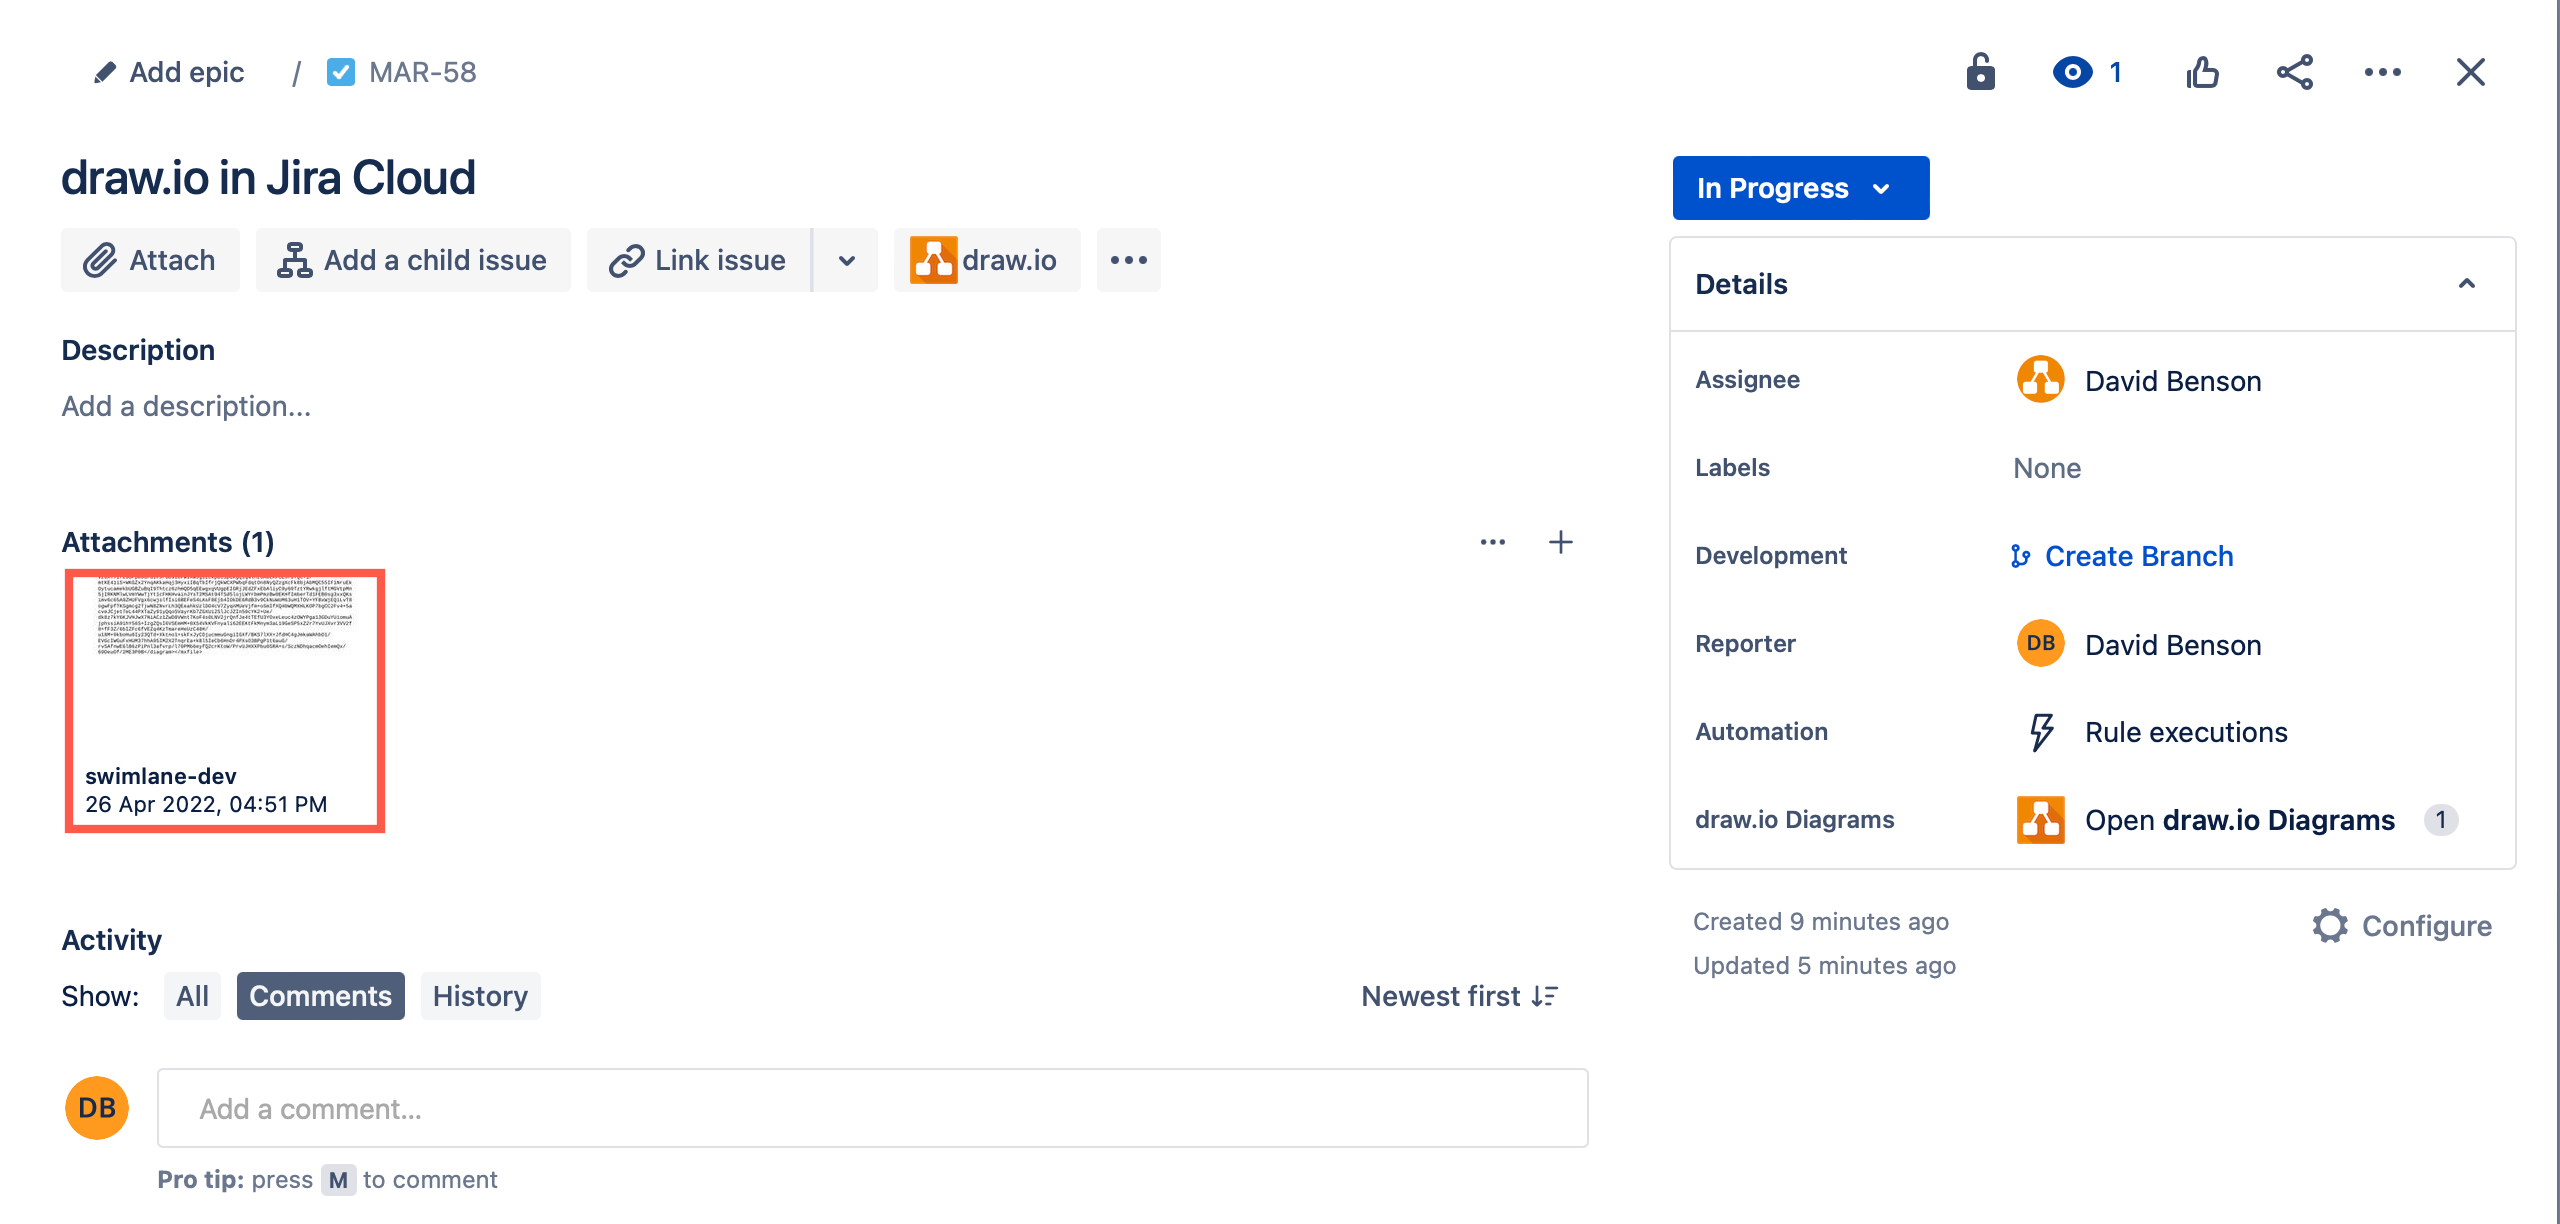 Your draw.io diagram file is added as an attachment to the Jira Cloud issue